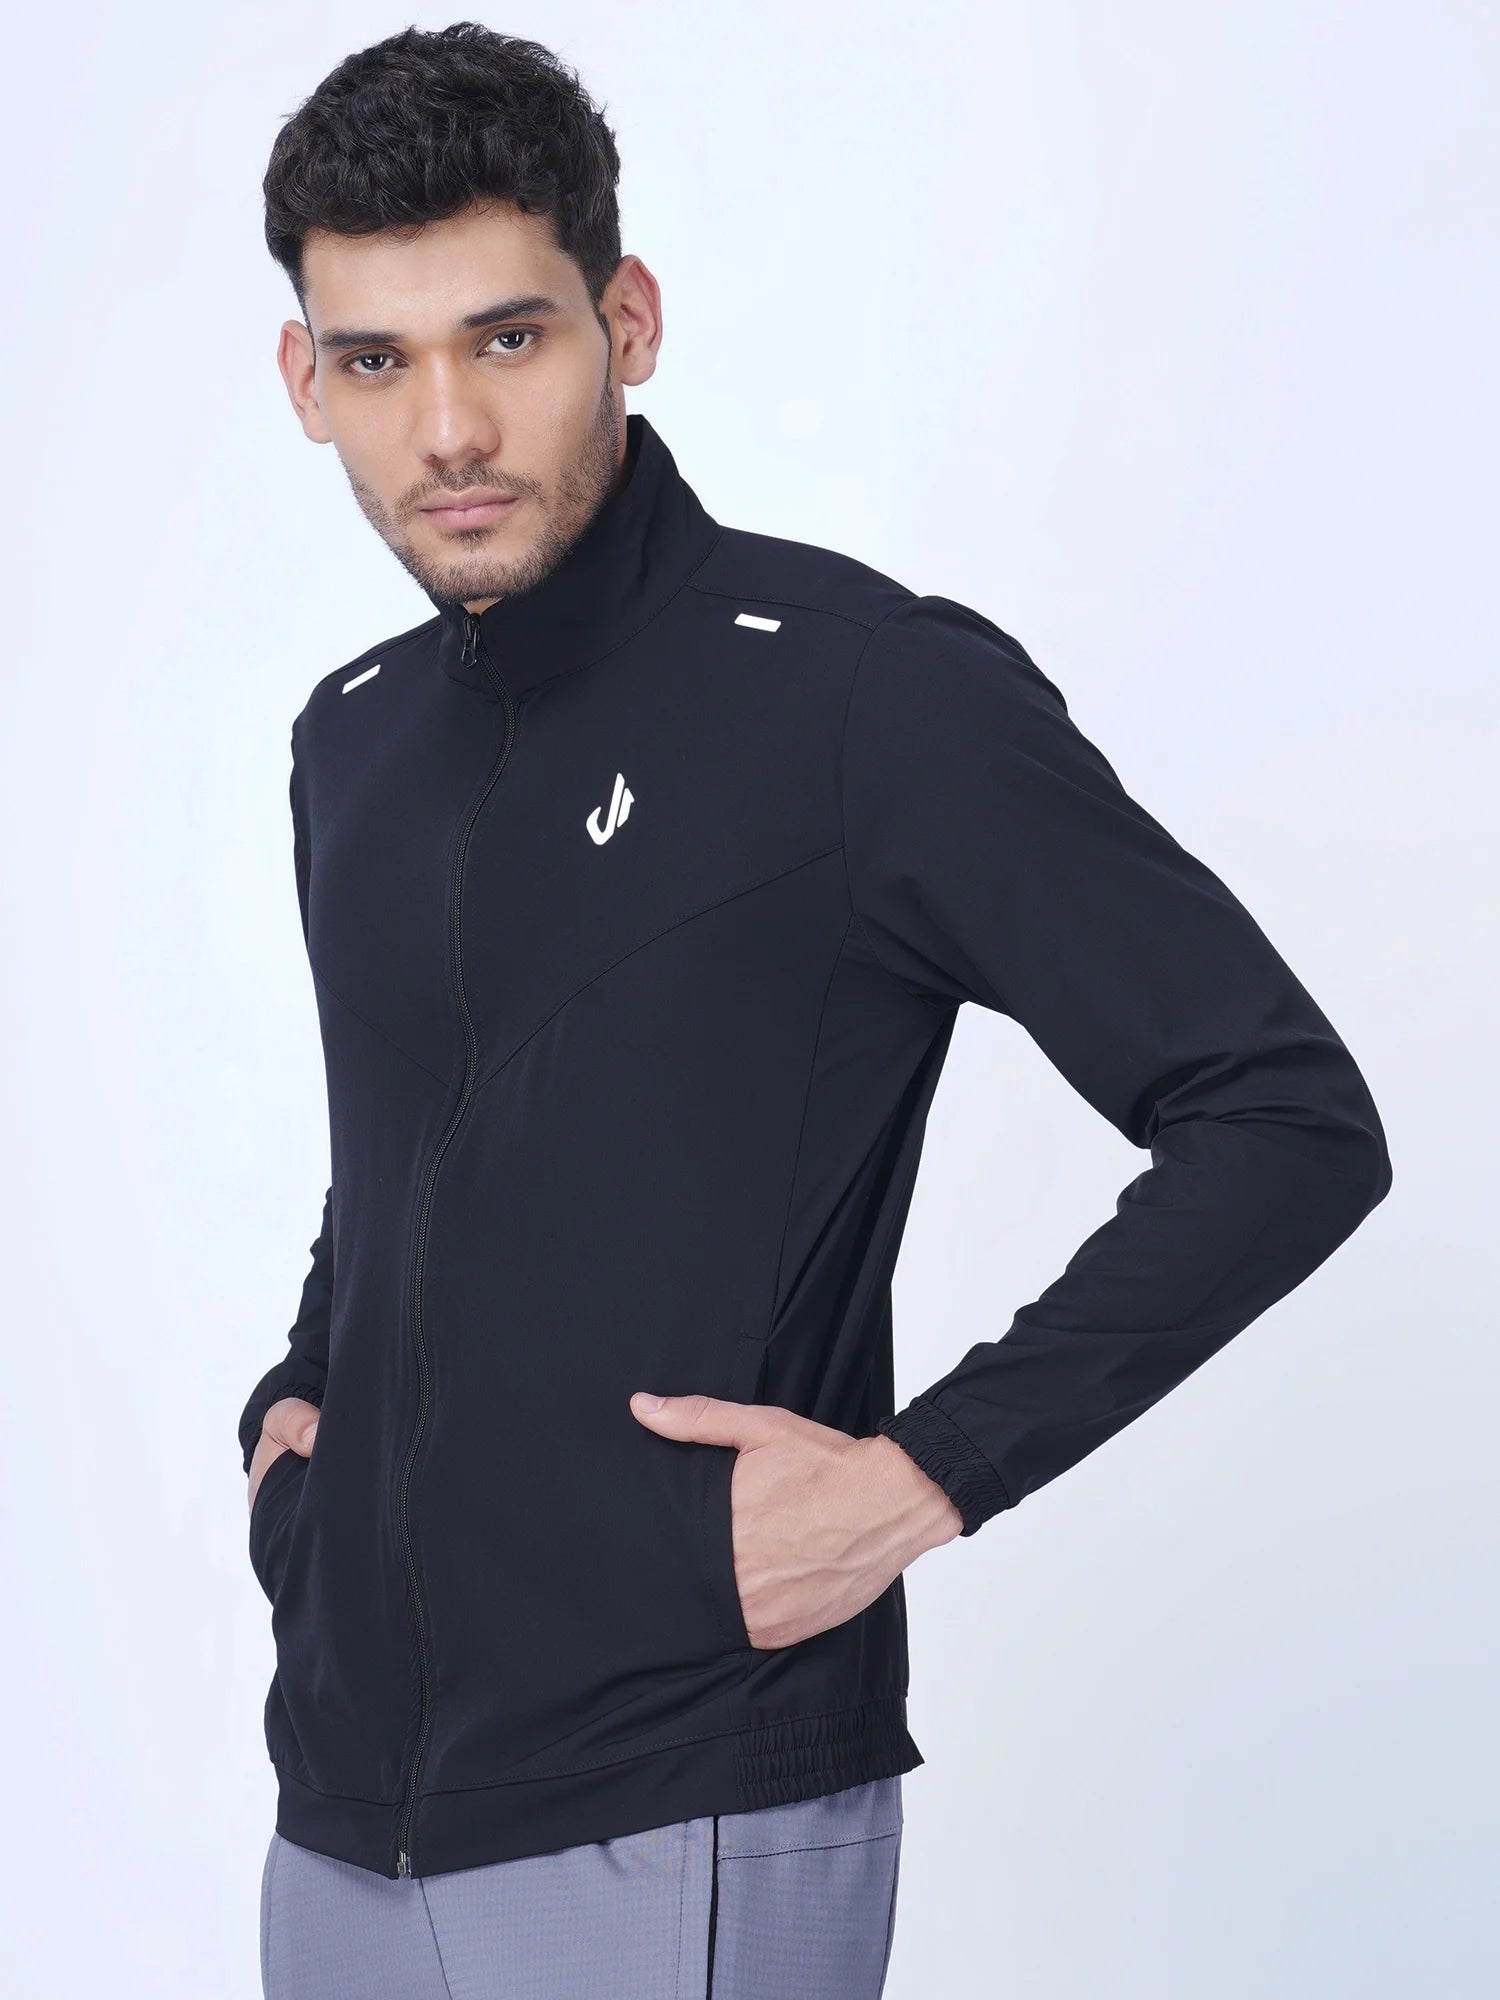 Woven Training Jacket (Solid Black)